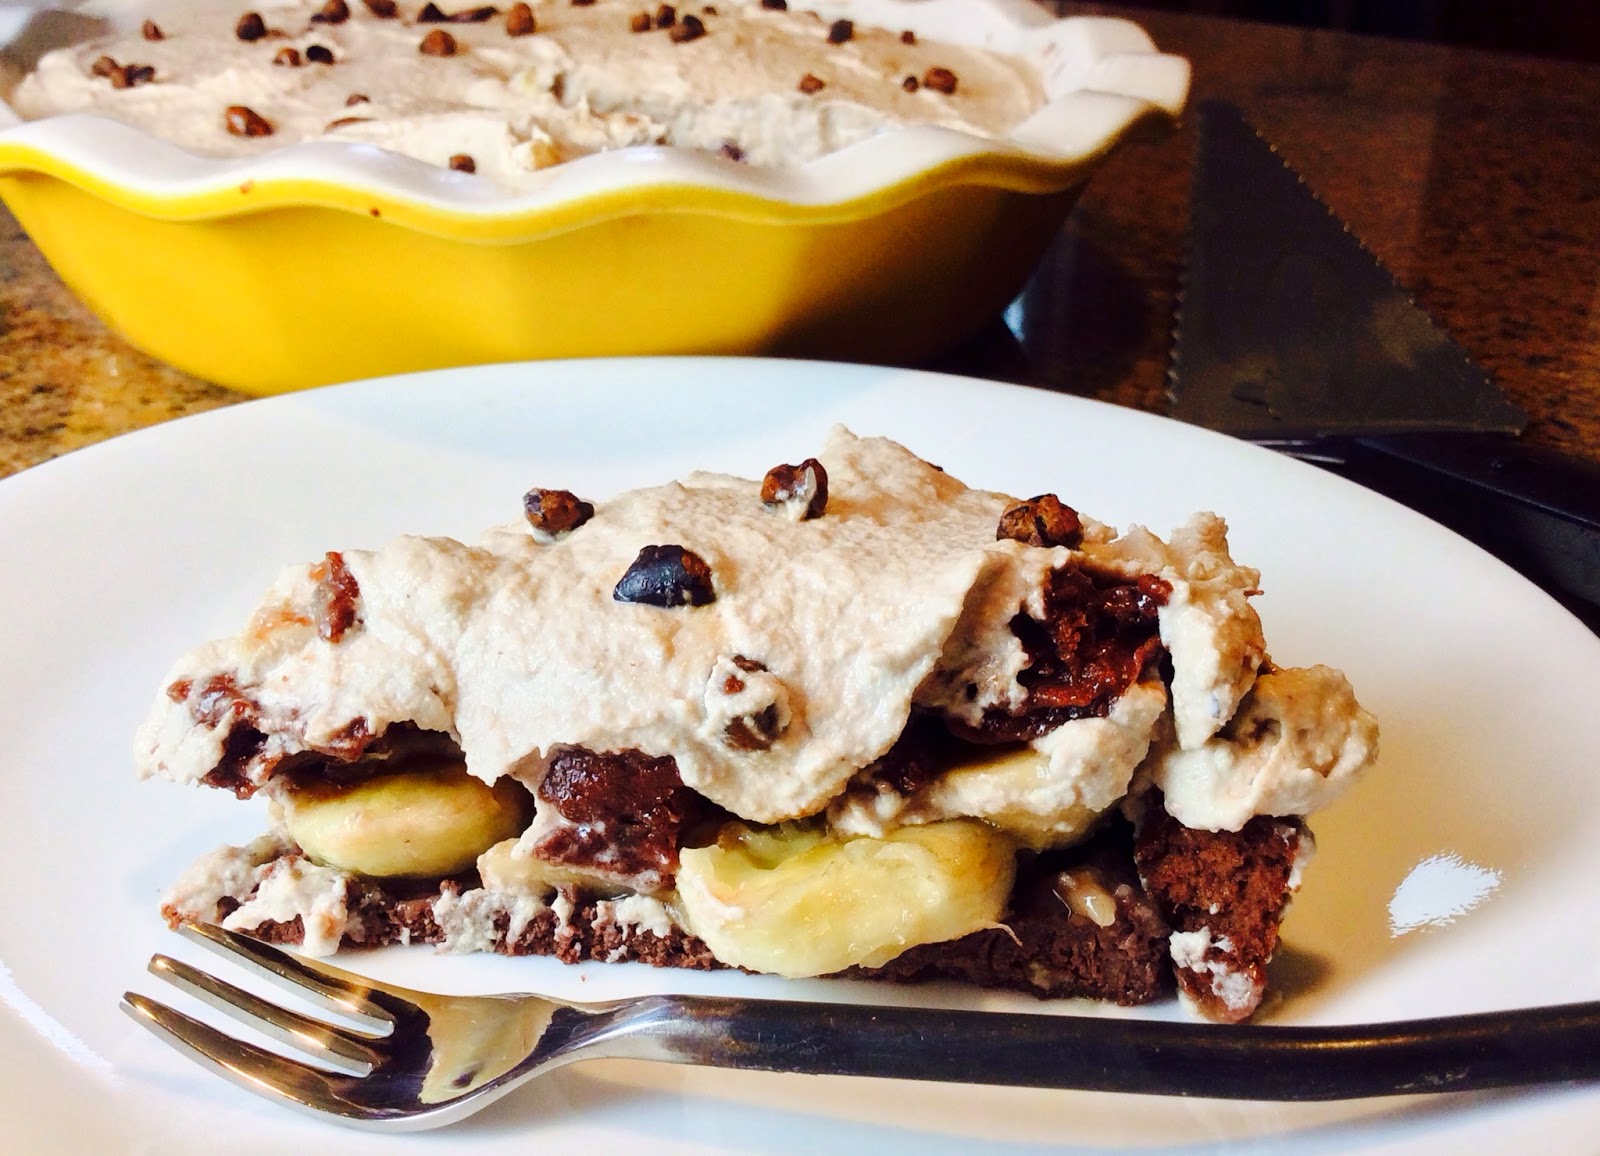 Food Fitness by Paige: Chocolate Toffee Banana Pie